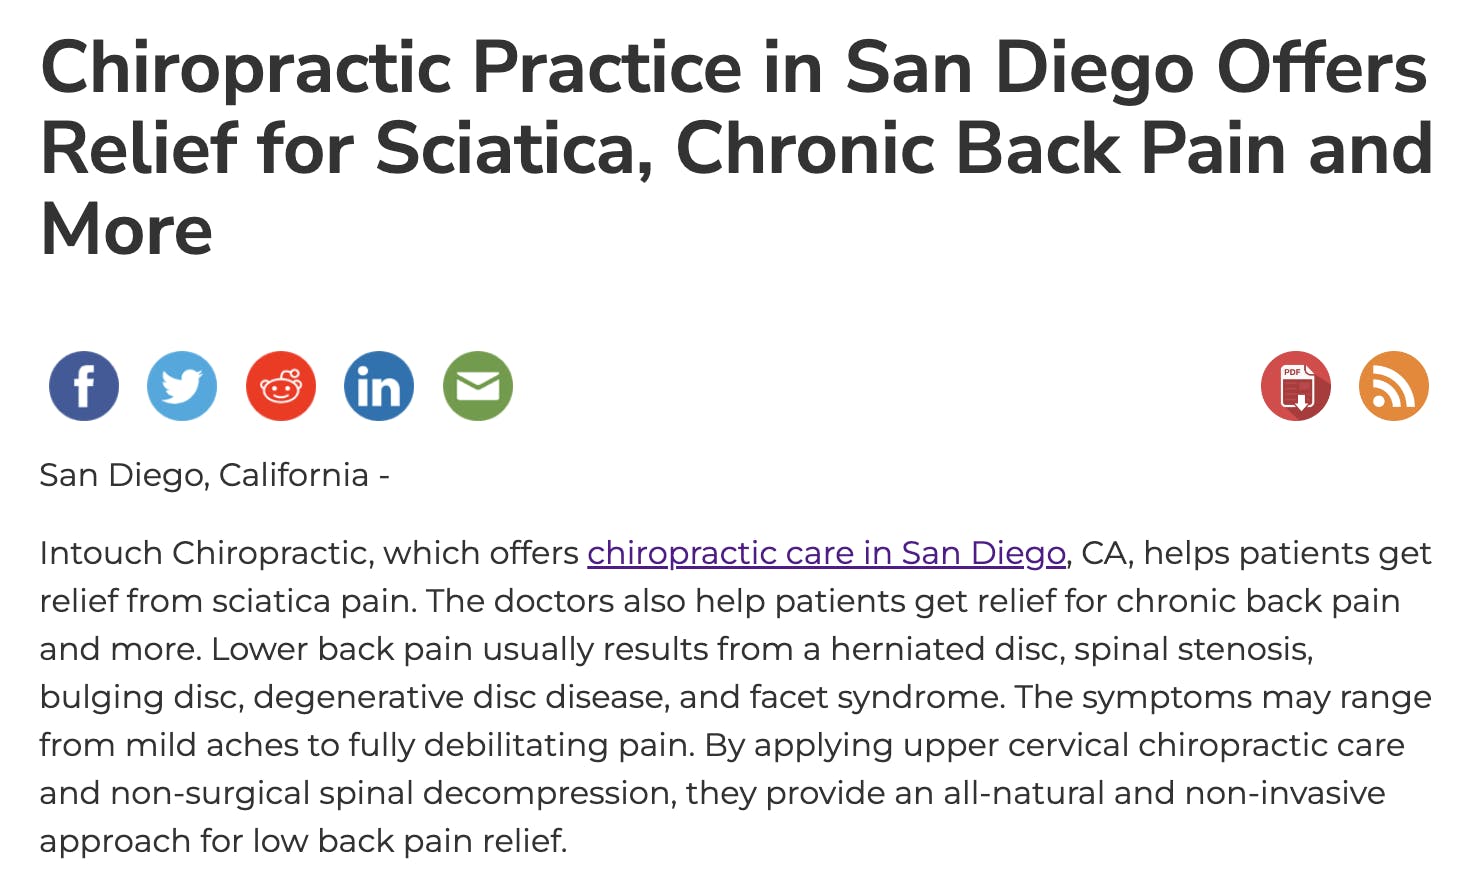 Relief for Sciatica, Chronic Back Pain and More